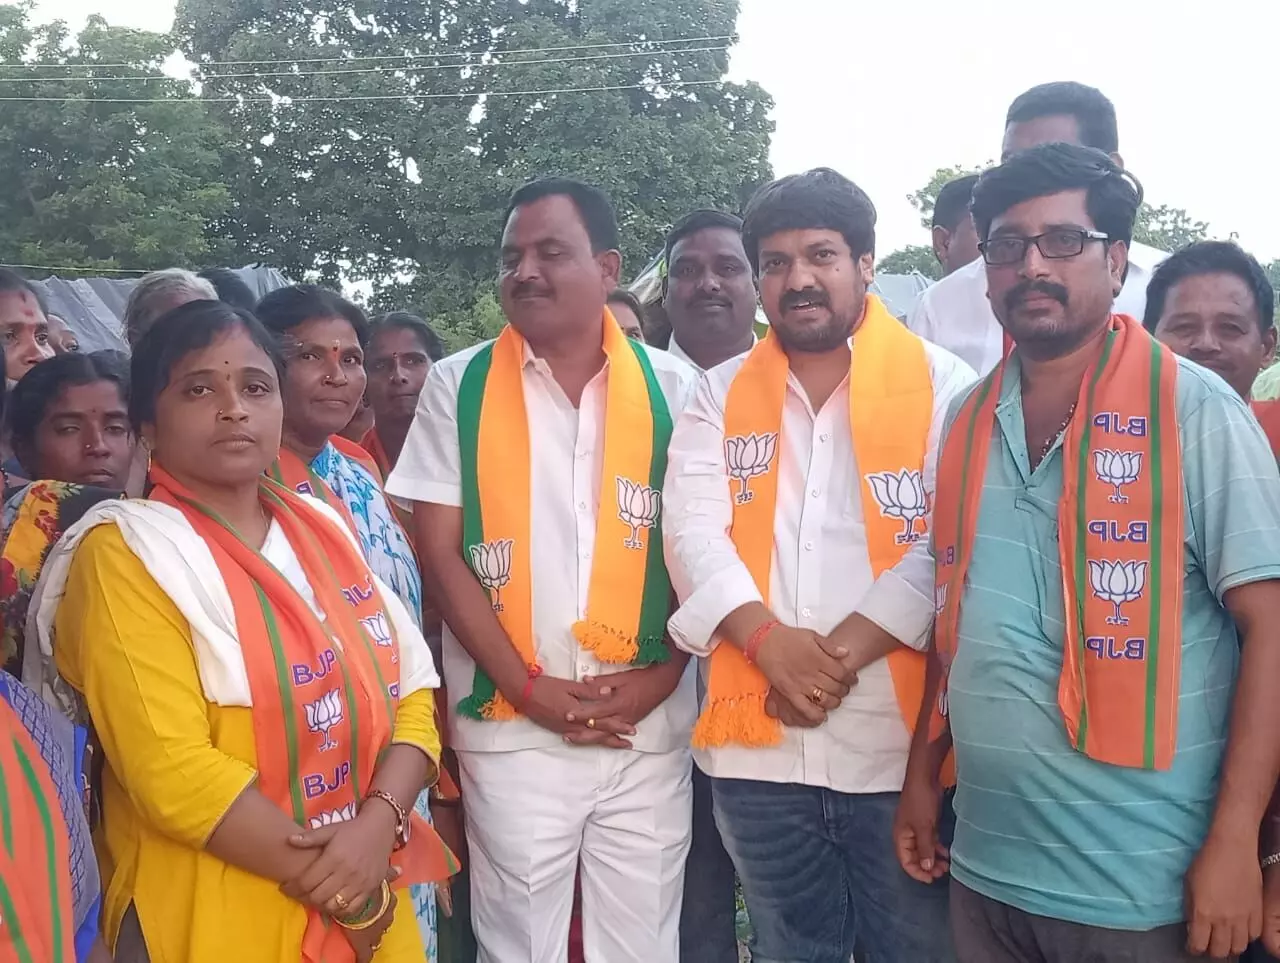 There is no corruption in BJP, says Mulugu BJP candidate Prahlad